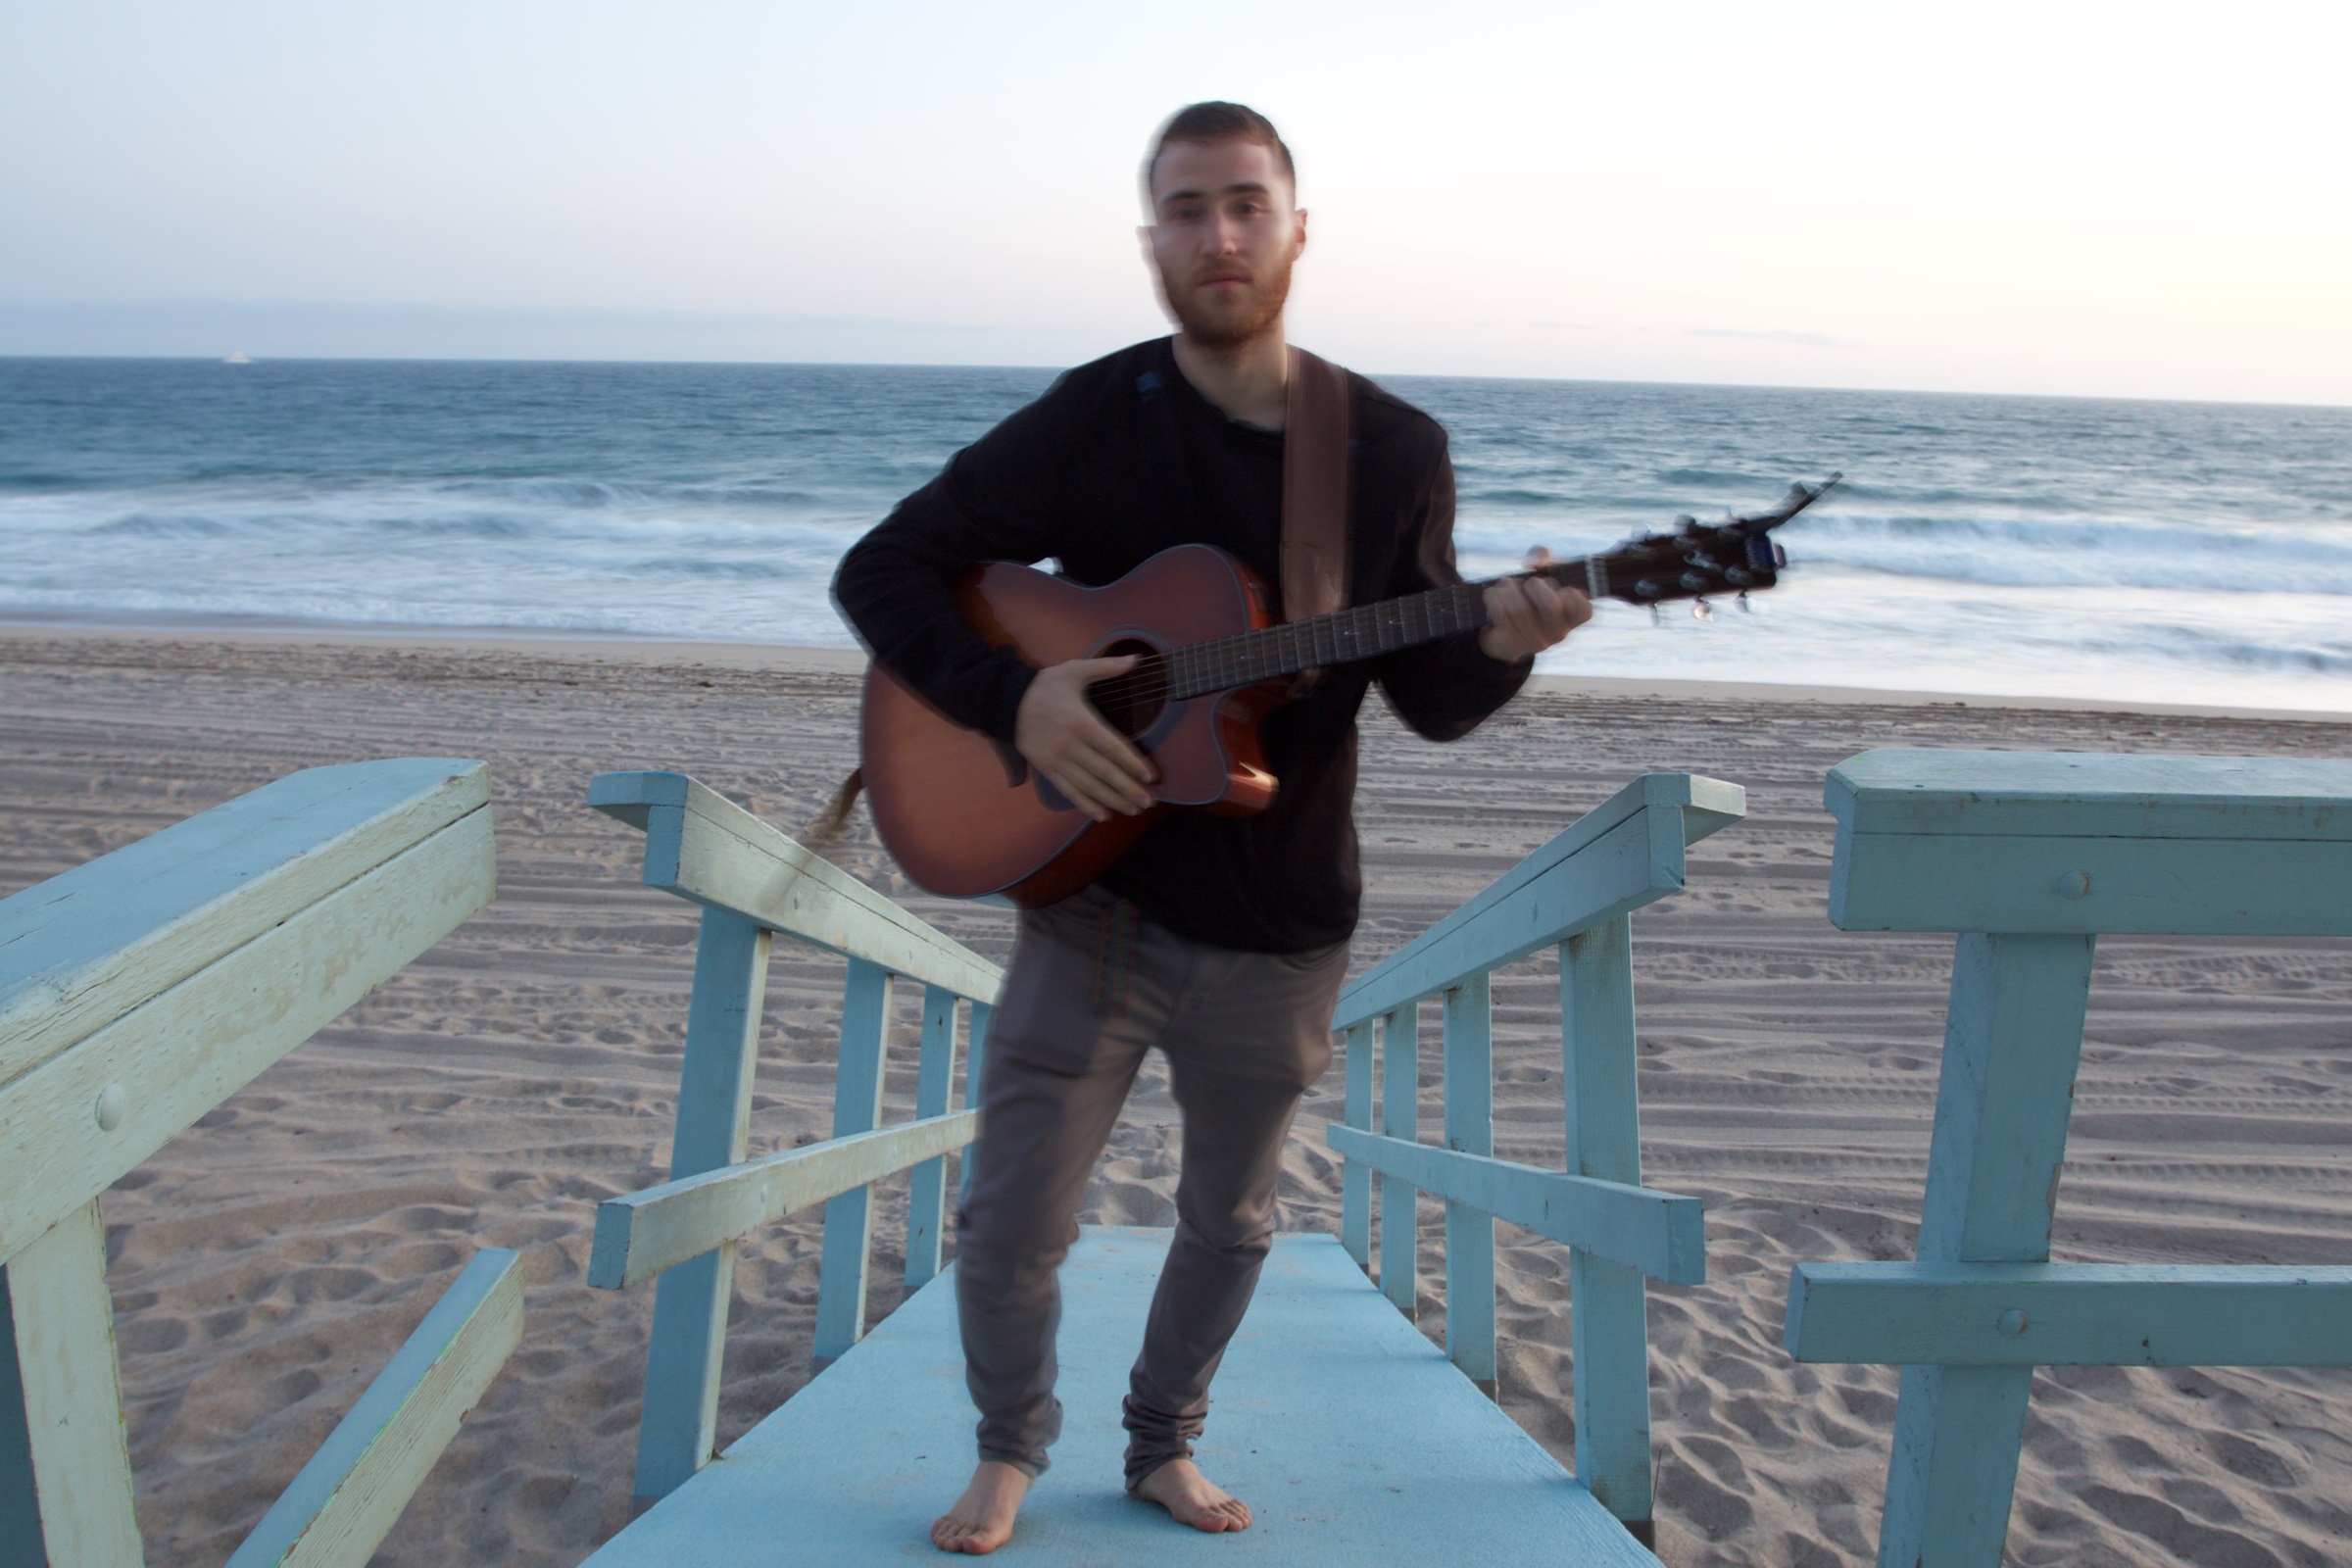 Mike Posner on a beach in California around June 2015
Photo by Adam Friedman
MikePosner.com
